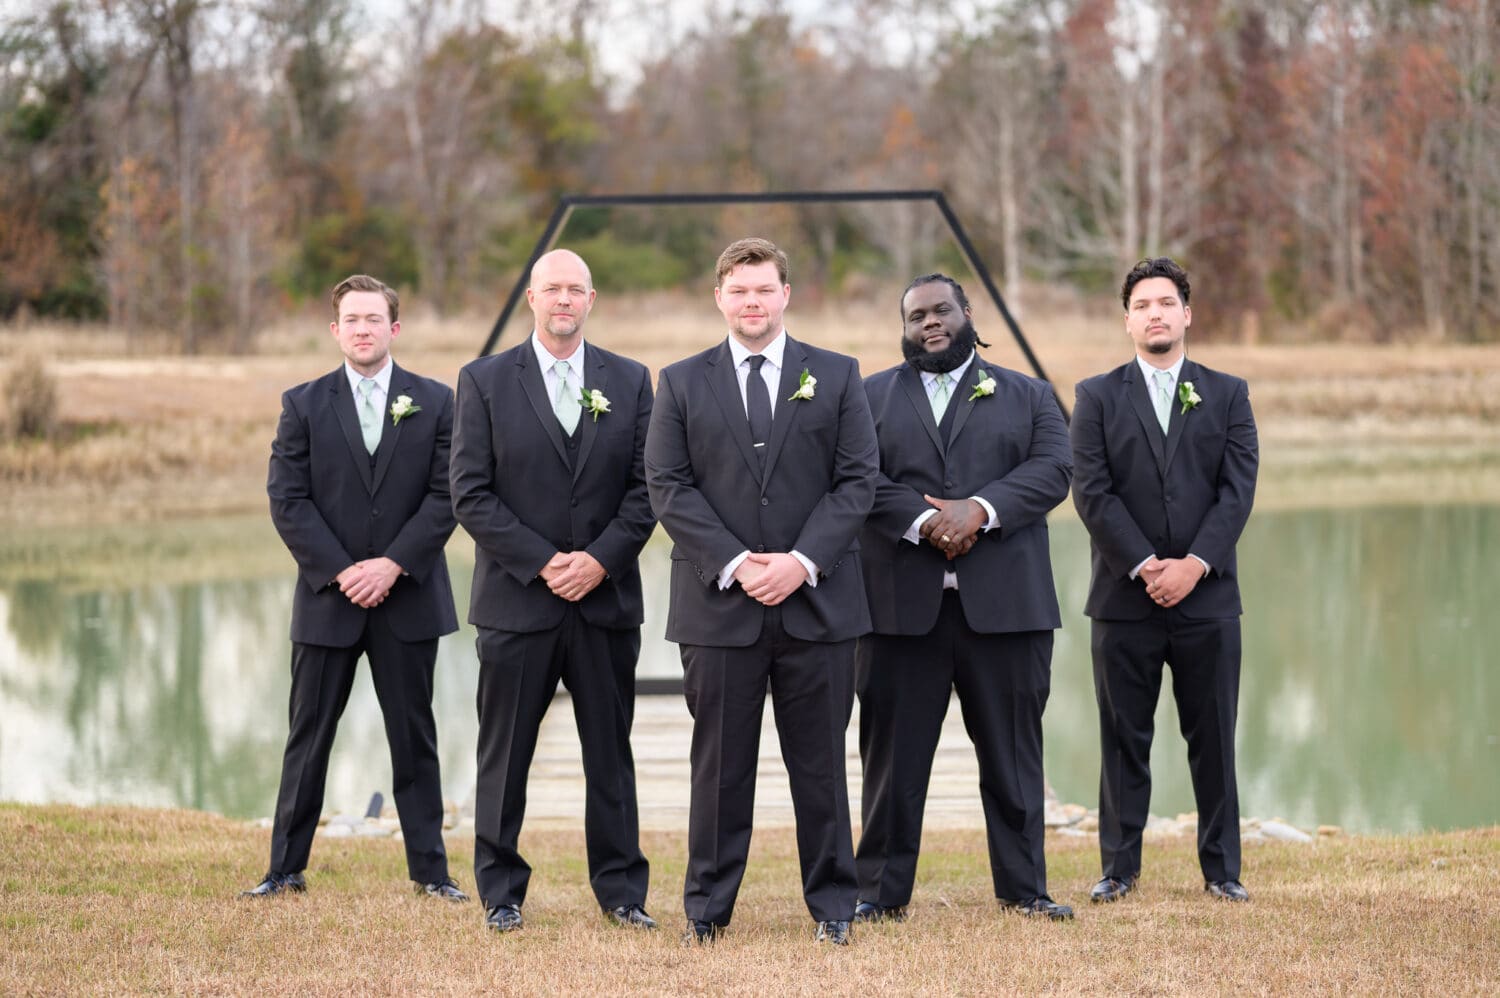 Groomsmen with groom - The Venue at White Oaks Farm